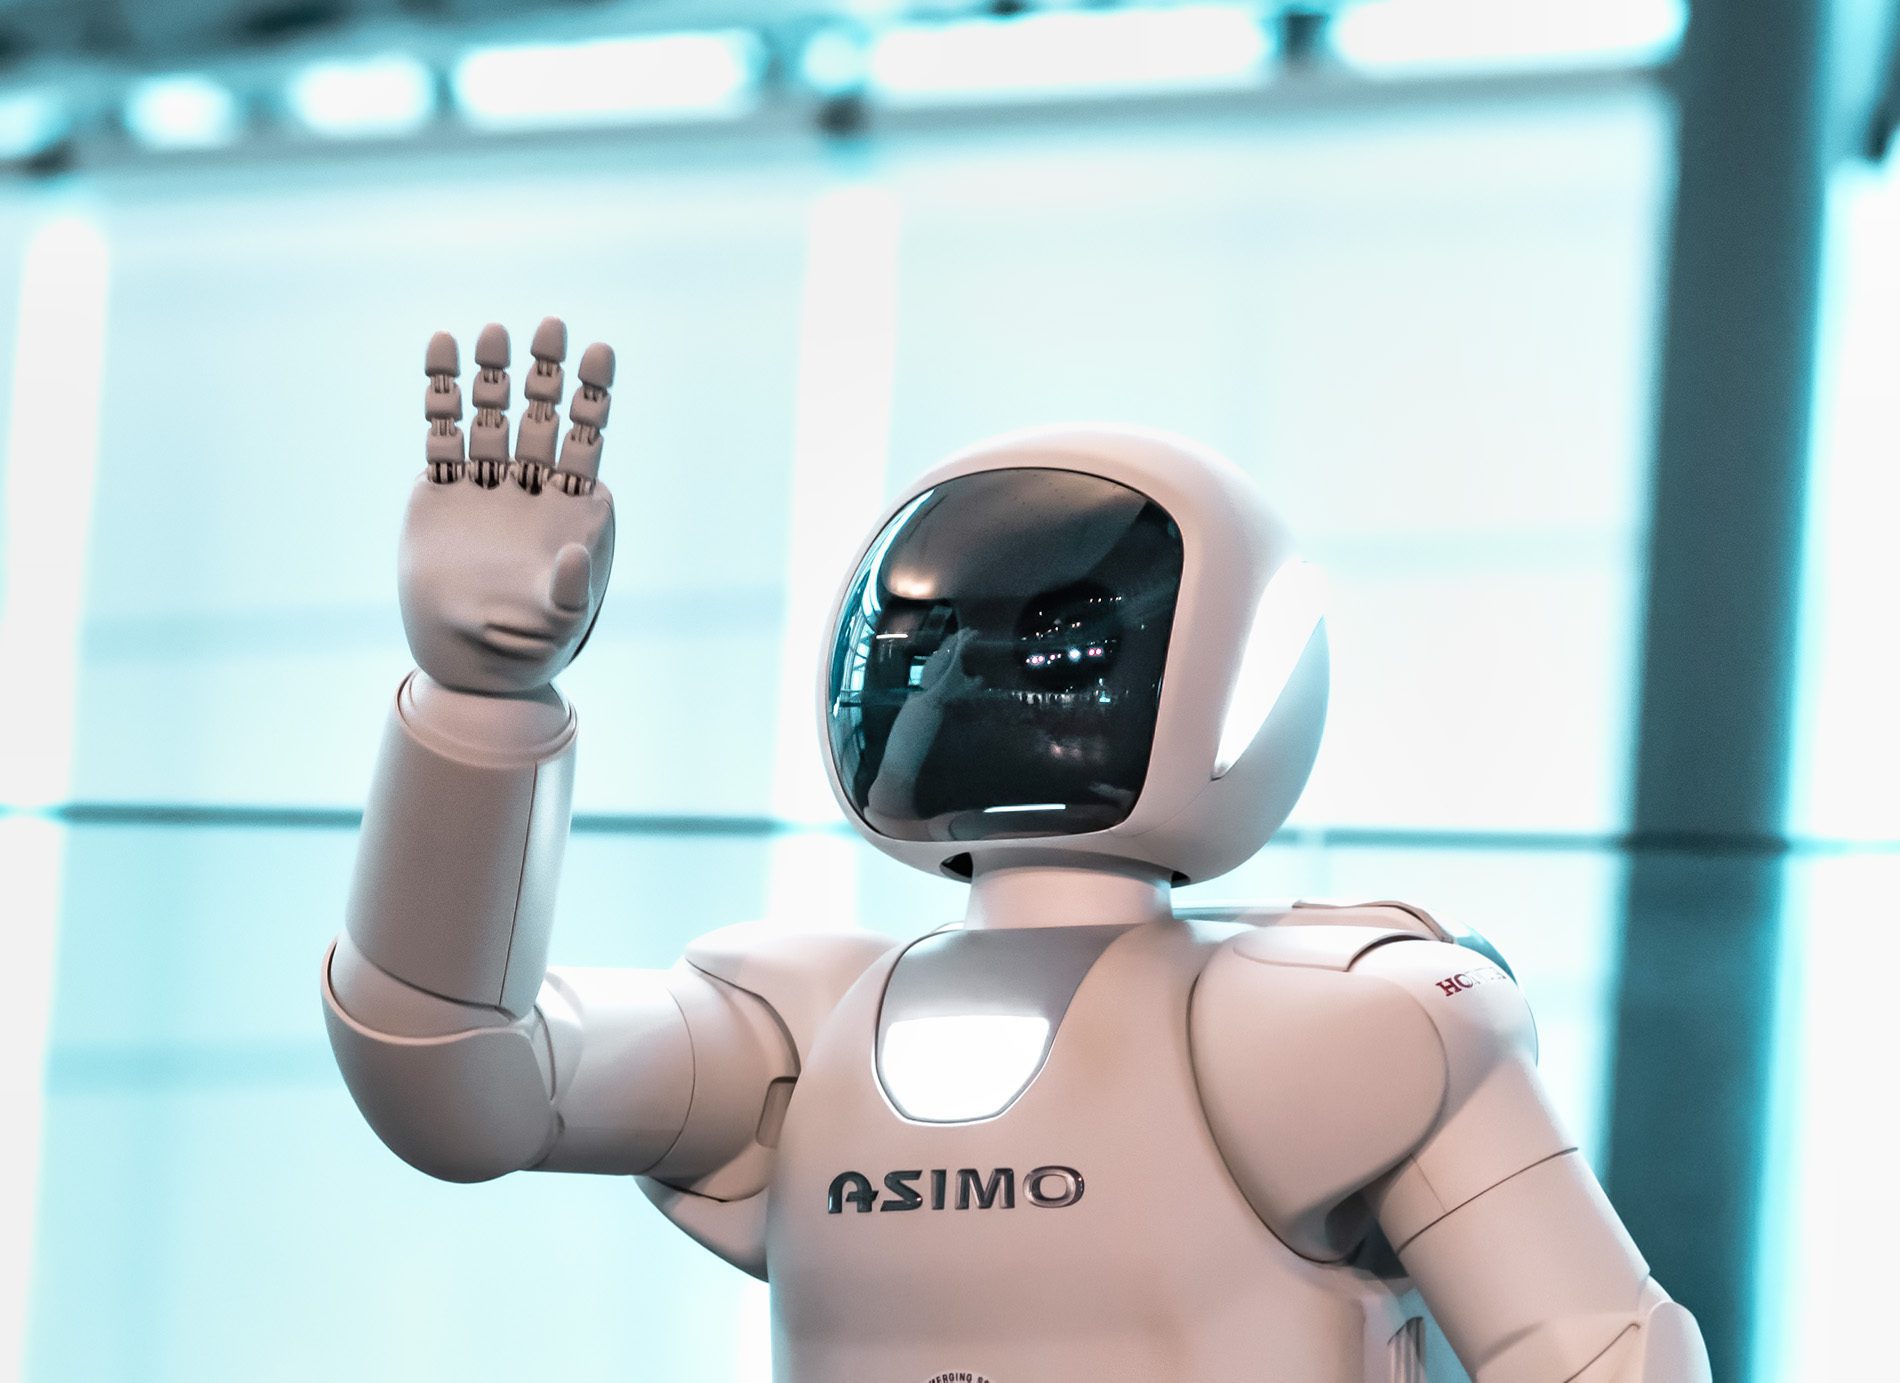 If you need good ideas for robot names, you've come to the right place (Photo: Unsplash).